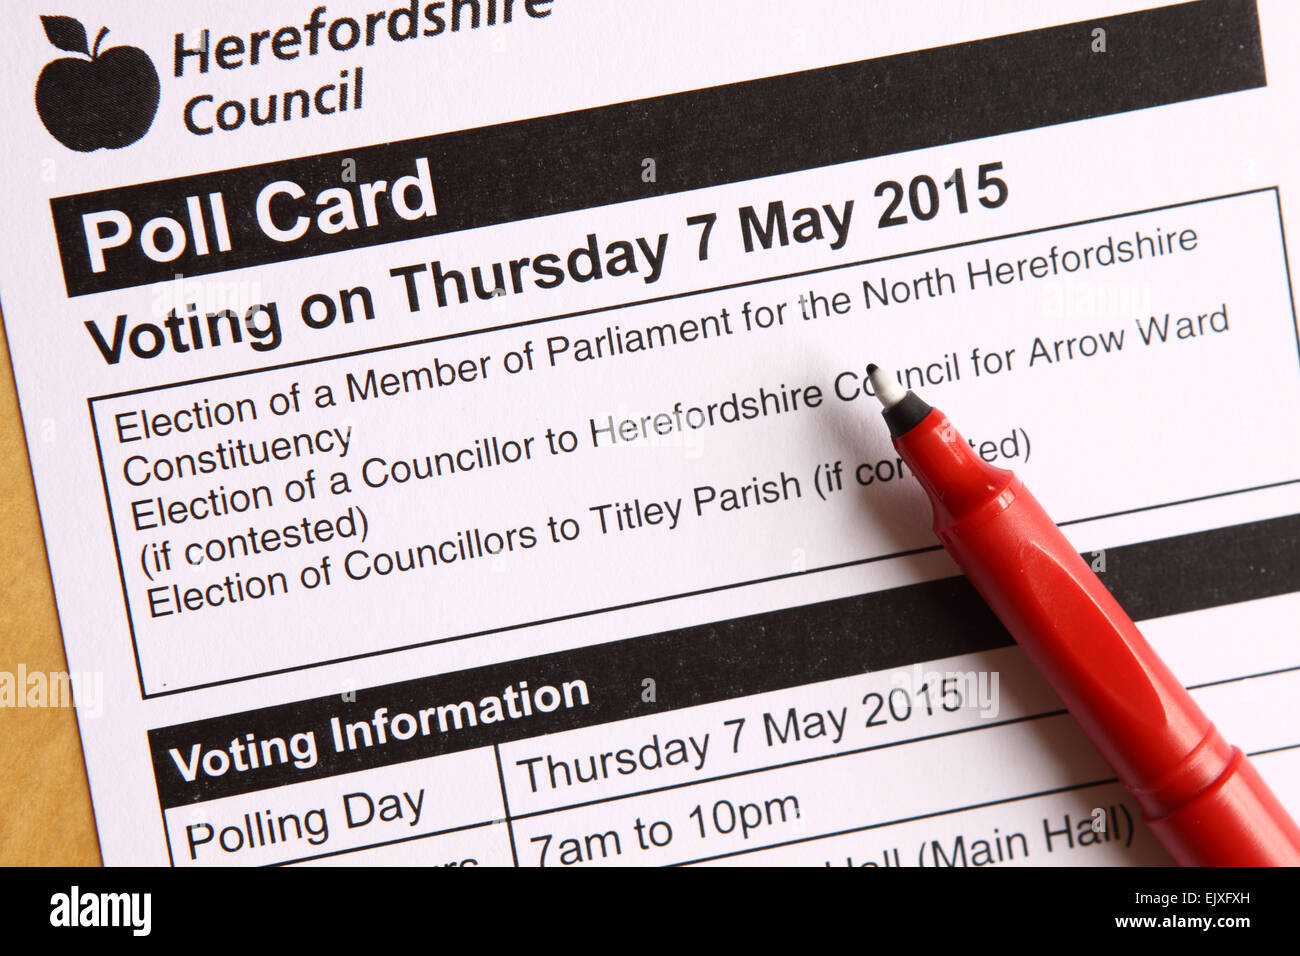 April 2015. Herefordshire Council have started to deliver voting Poll Cards to voters in the county ready for the General Elections on 7th May 2015. Registered voters will be able to vote for their local Member of Parliament ( MP ) in the national General Election, local county councillor and also local parish councillor. Stock Photo